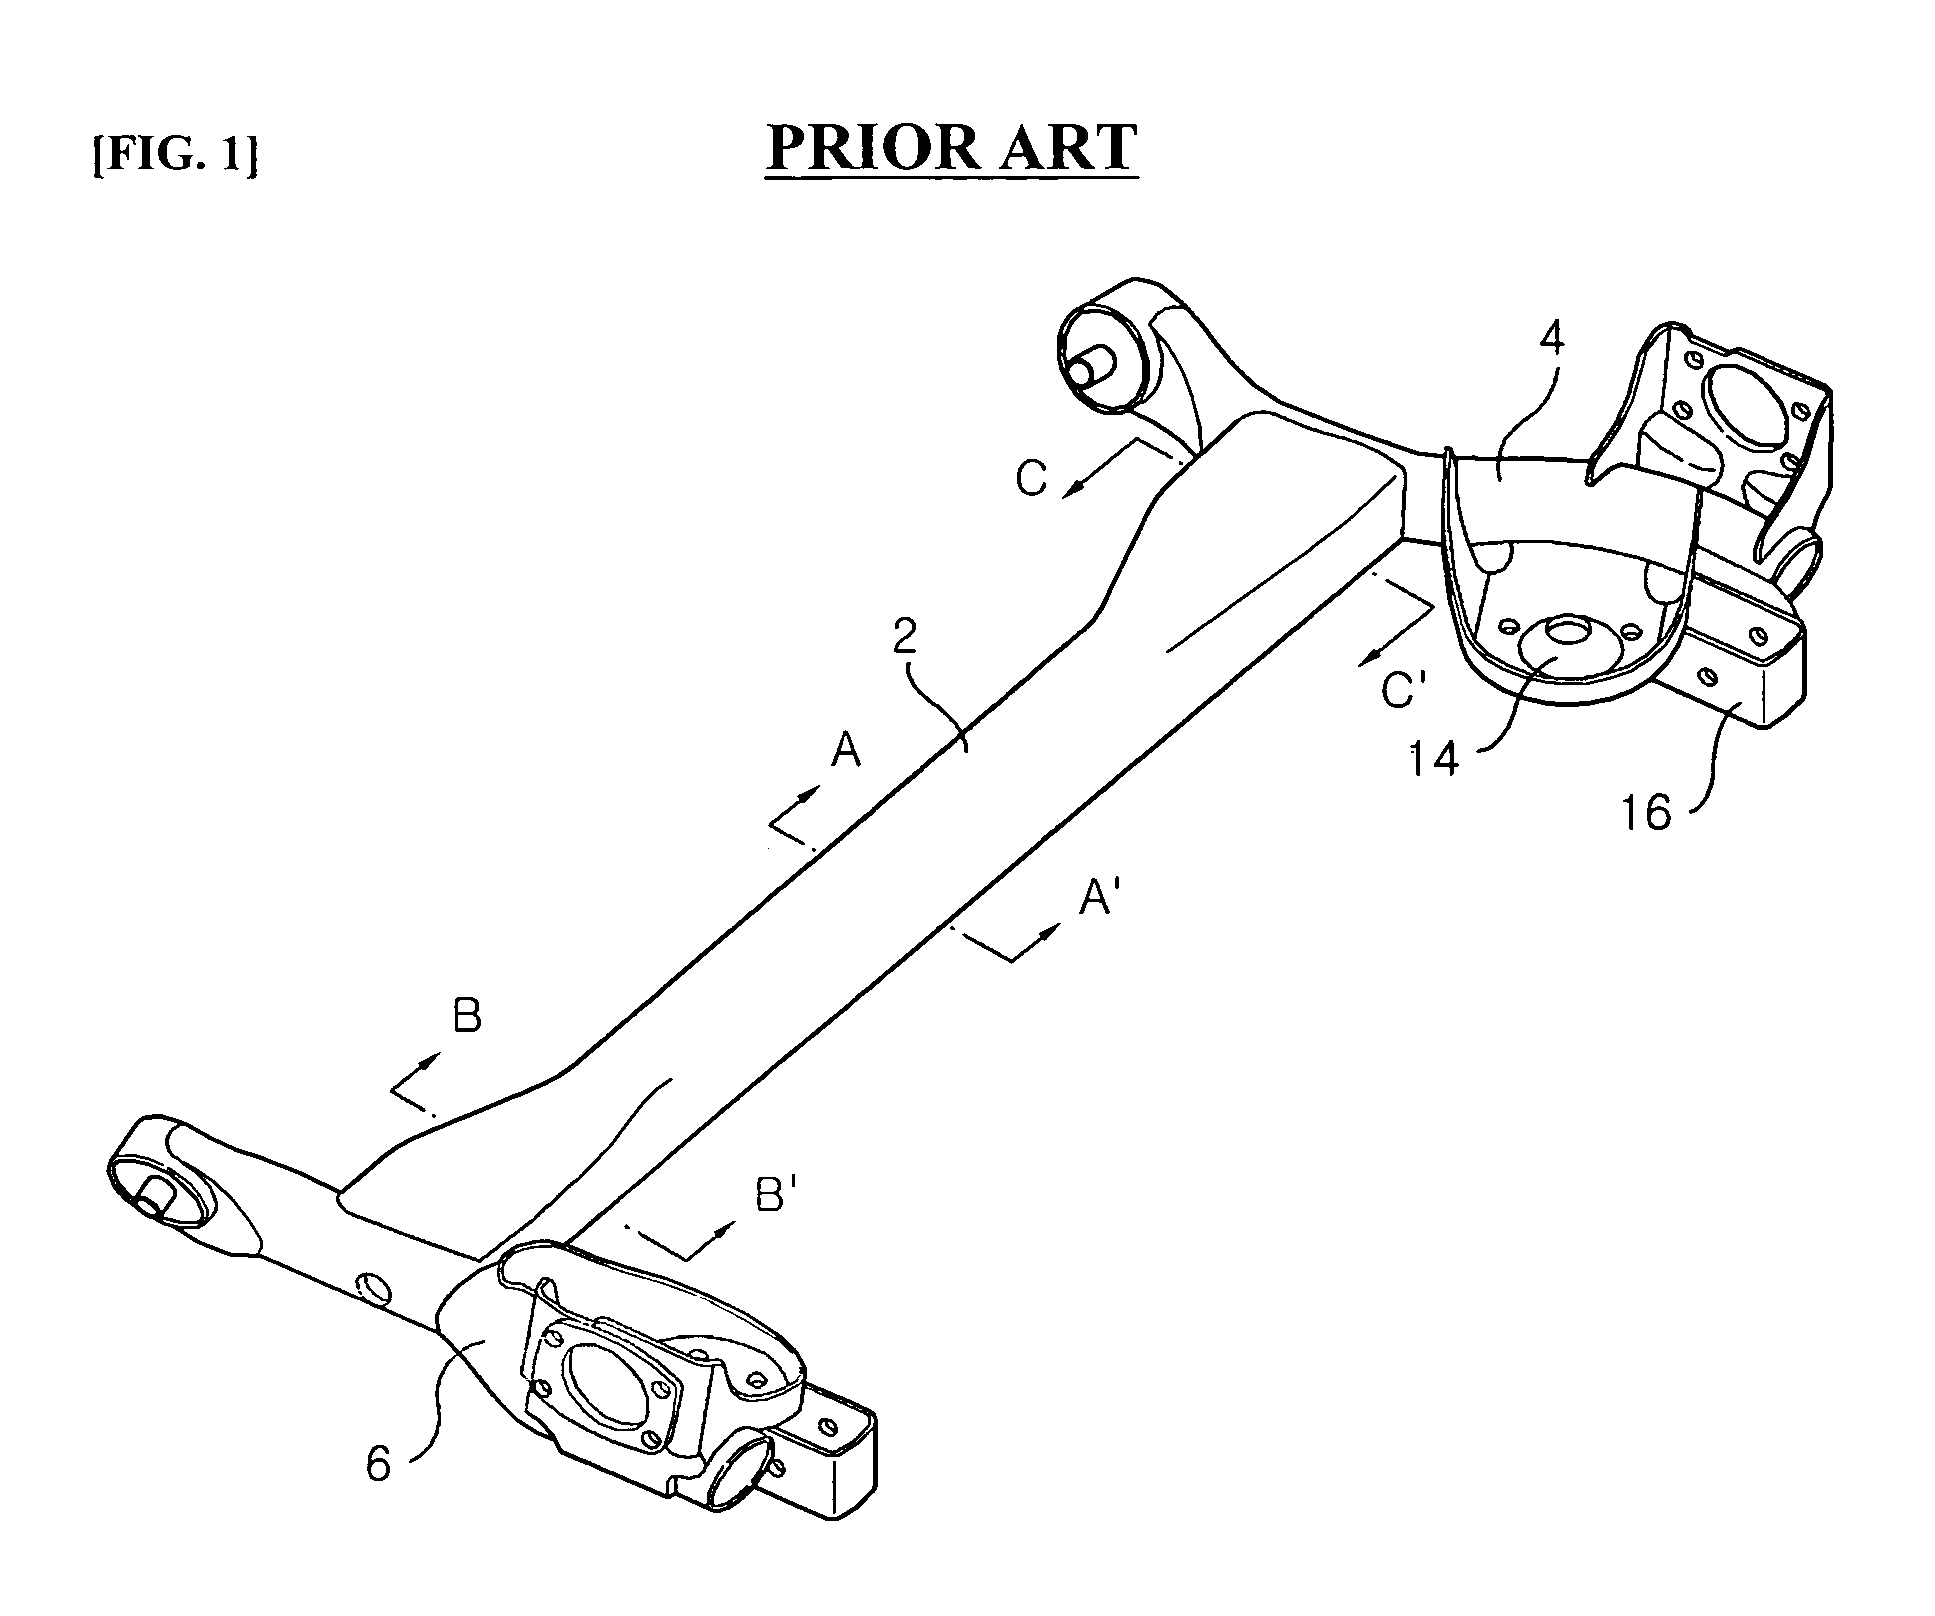 Ball and socket mount for shock absorber of torsion beam axle suspension